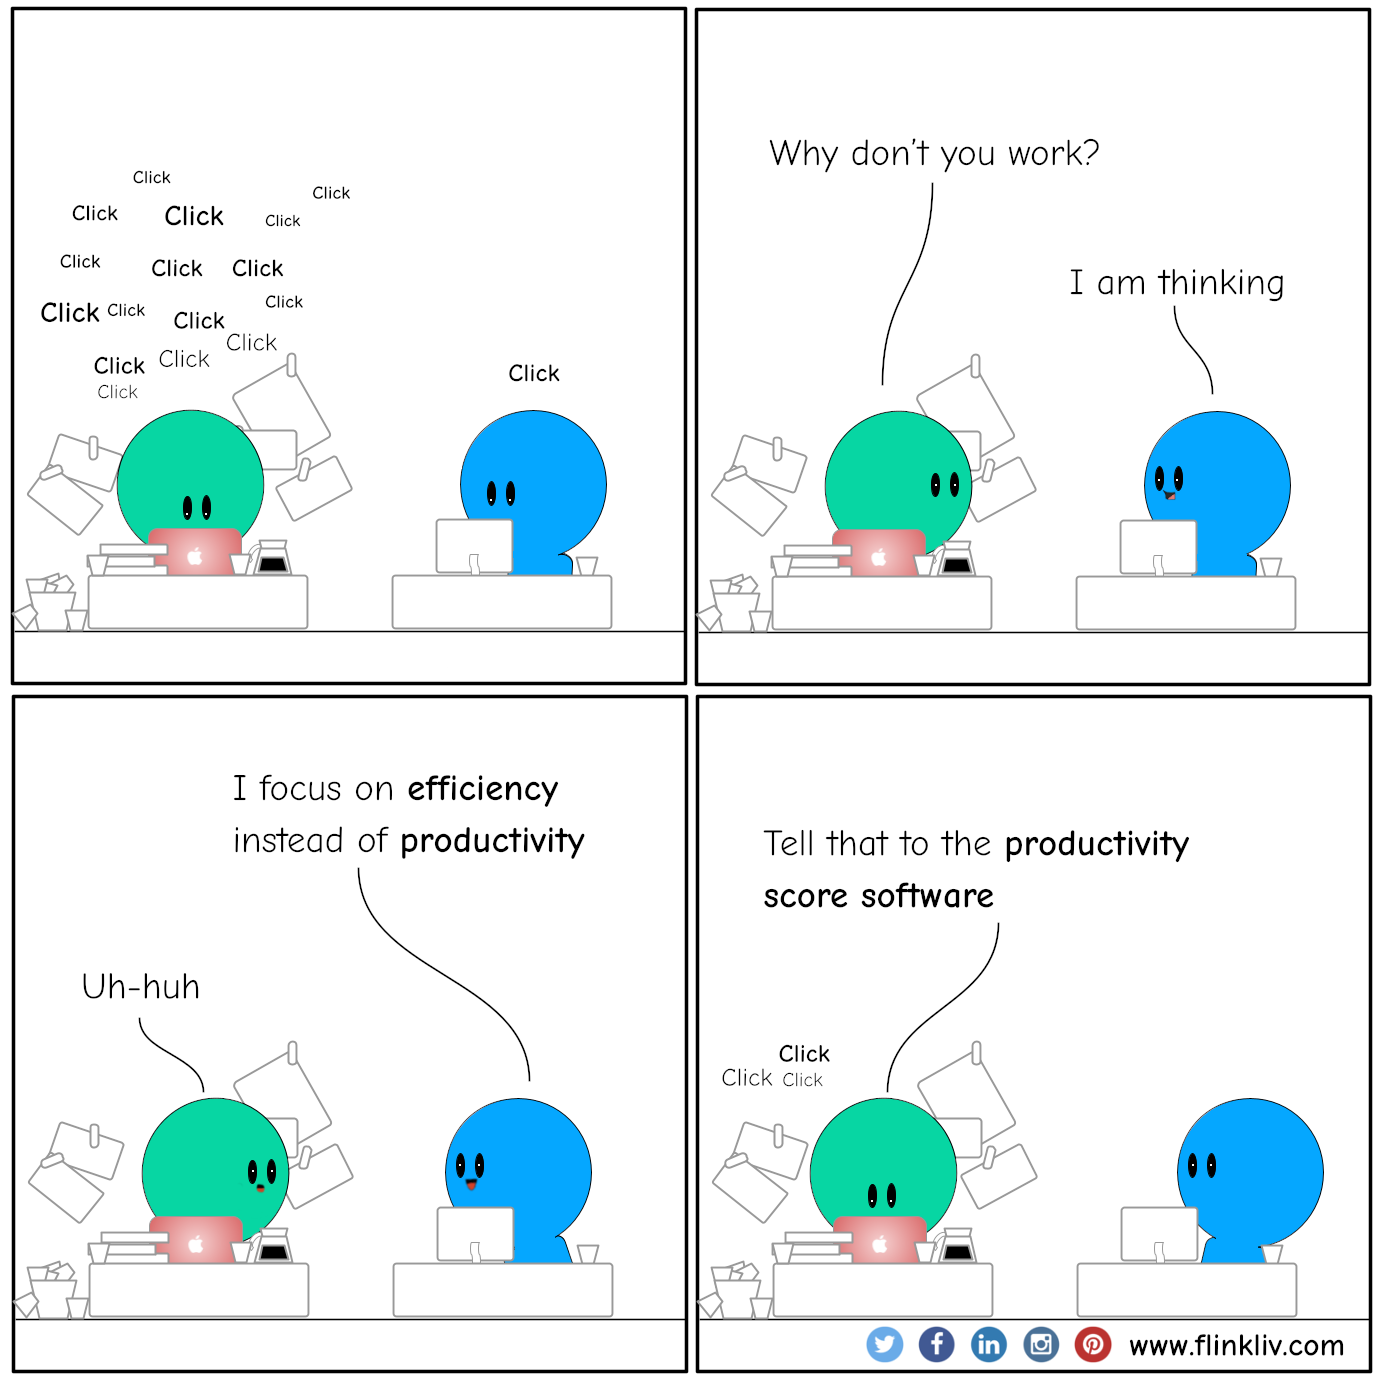 Conversation between A and B about efficiency vs productivity.
			Tapping on keyboards Click Click Click Click
			A: Why don't you work?
			B: I am thinking
			B: I focus on efficiency instead of productivity 
			A: Uh-huh
			A: Tell that to the productivity score software 
			